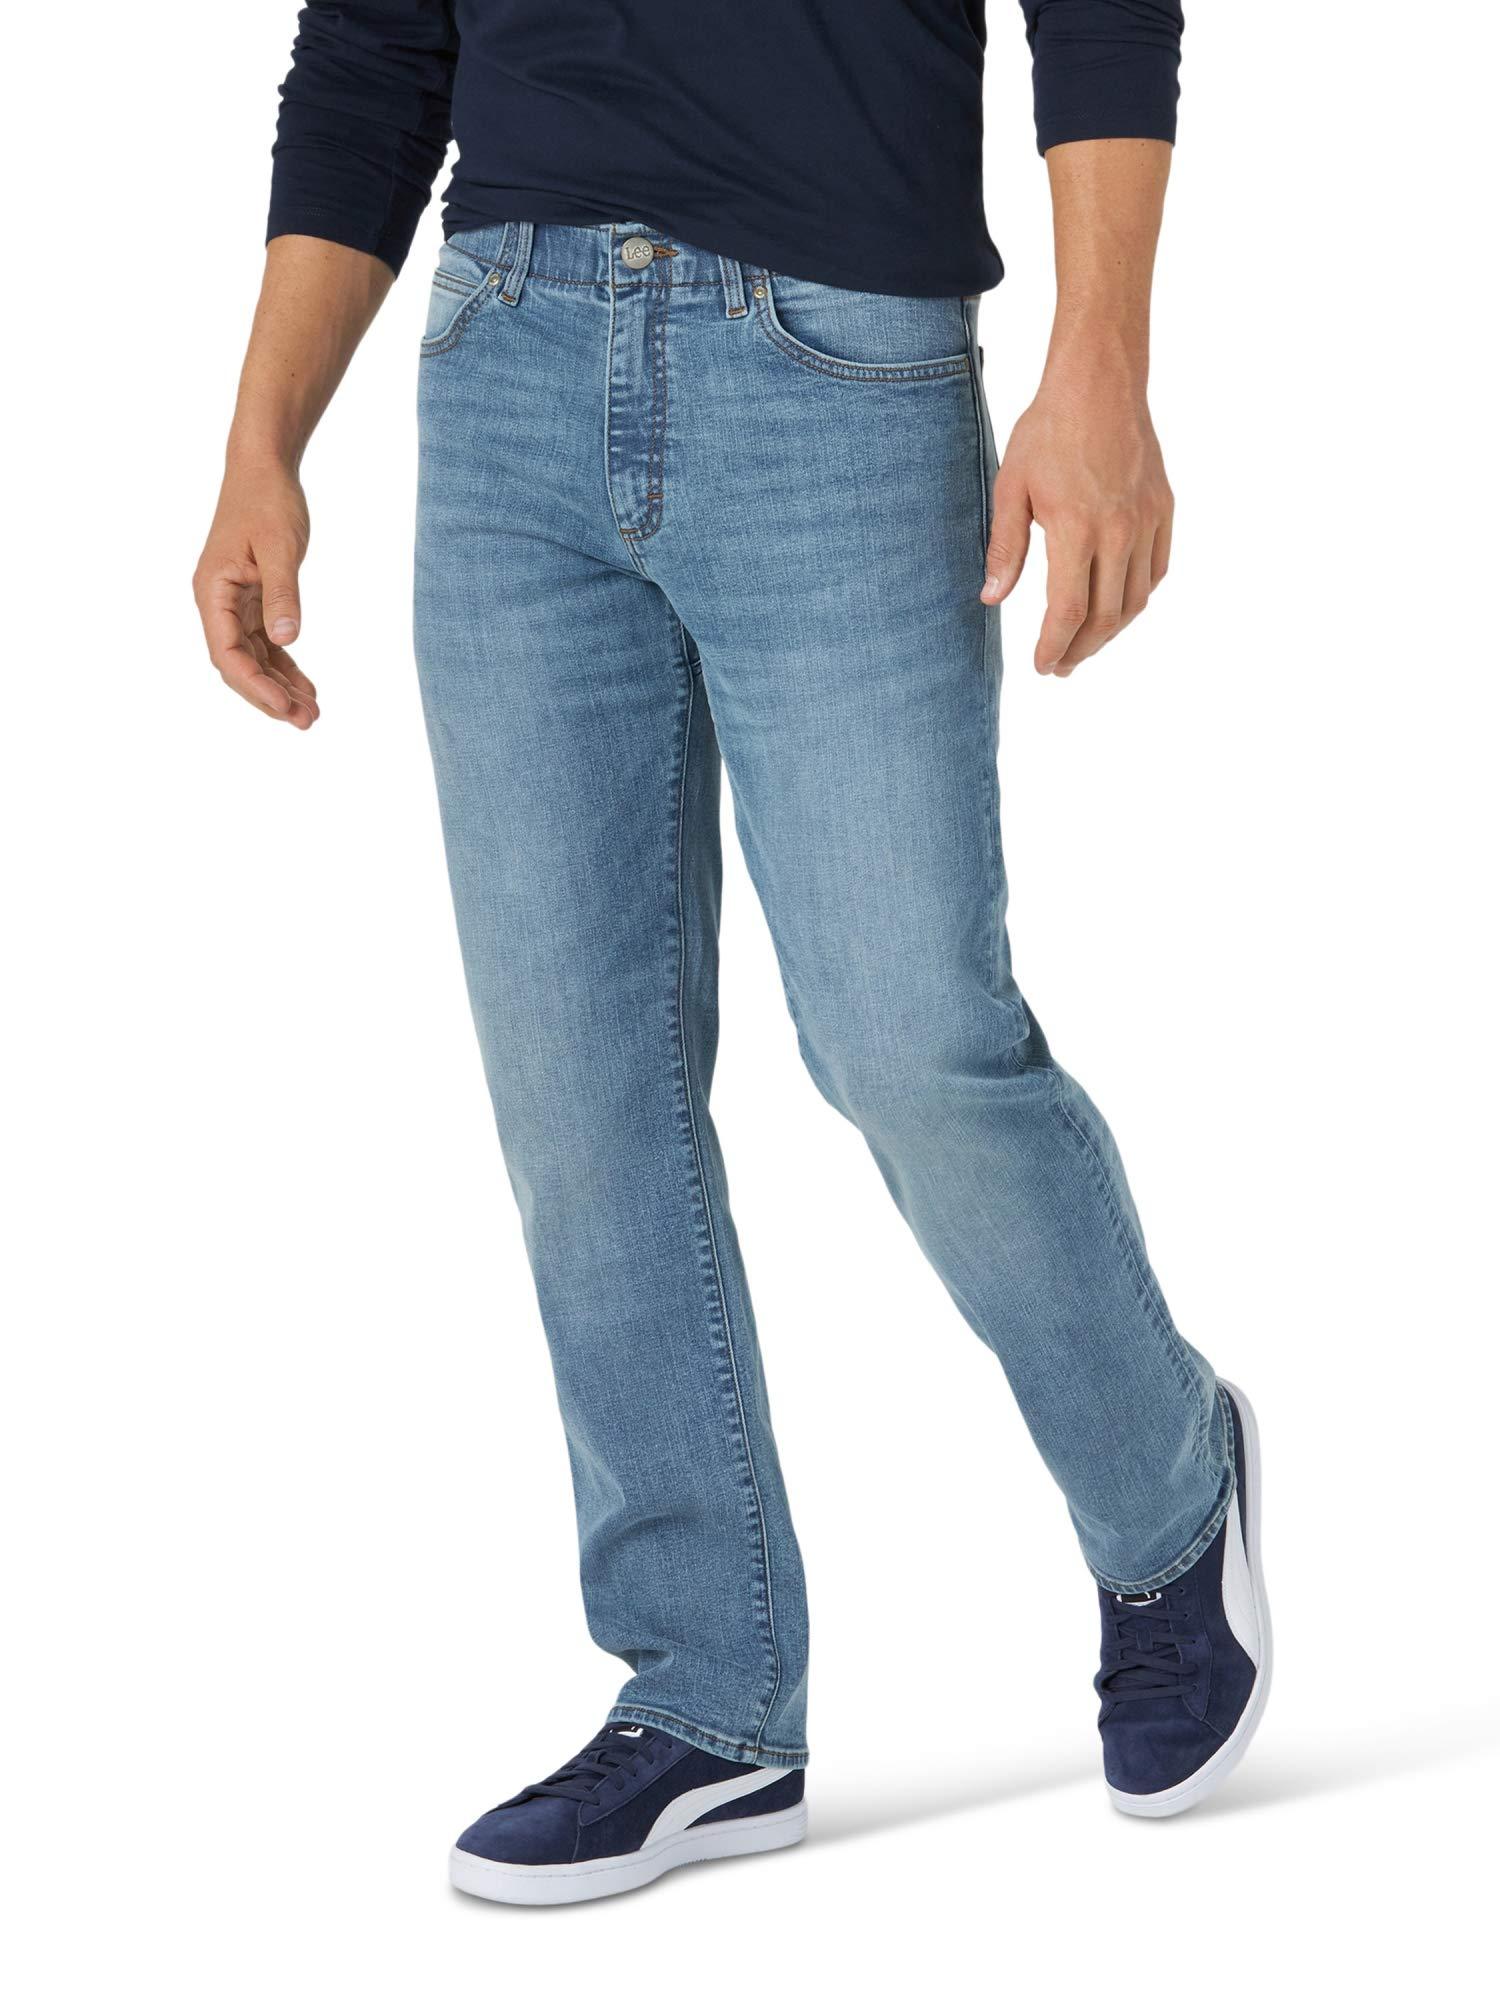 Lee Jeans Performance Series Extreme Motion Regular Fit Jean in Blue ...